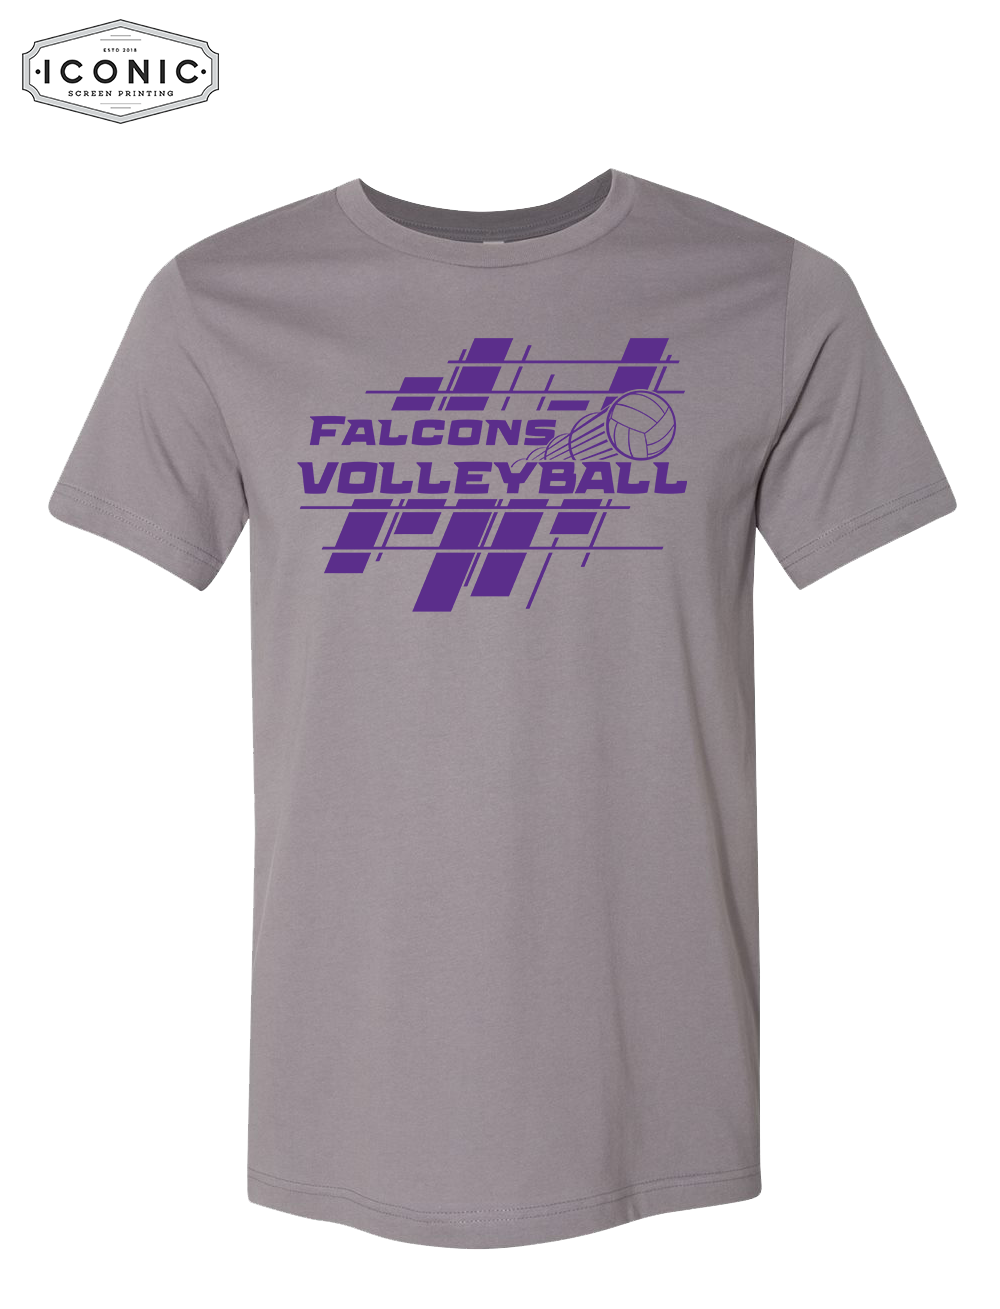 Falcons VolleyBall - Unisex Jersey Tee